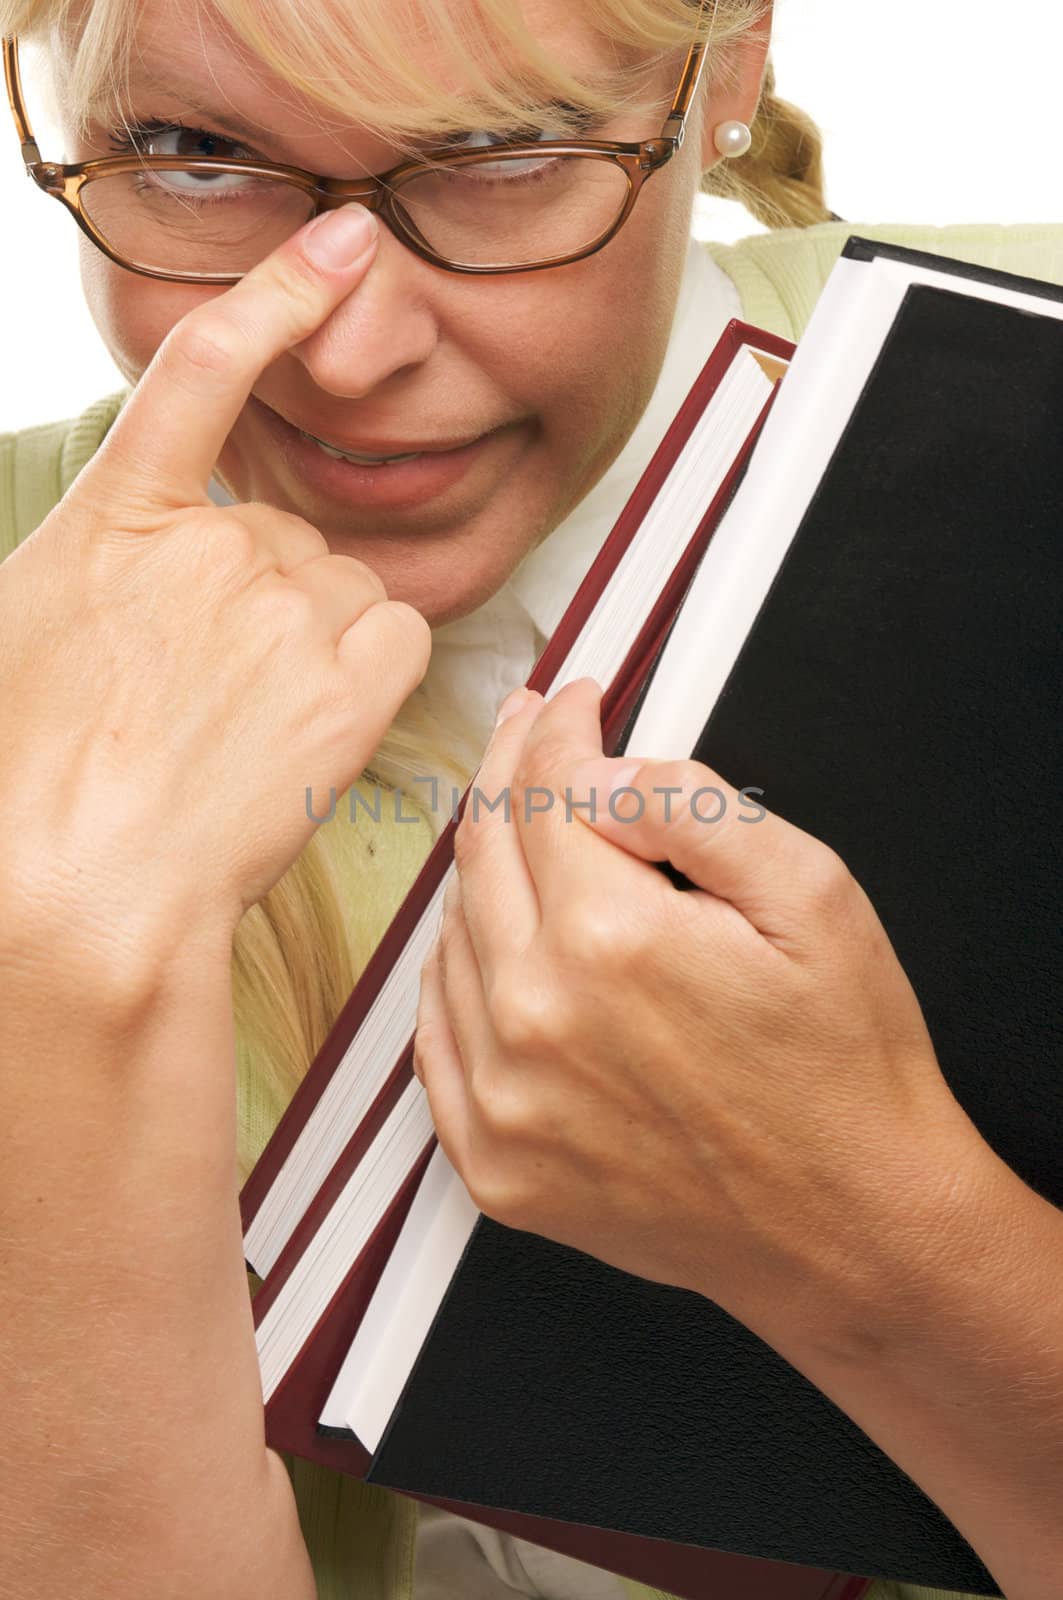 Cute Student with Retainer Carrying Her Books isolated on a White Background.